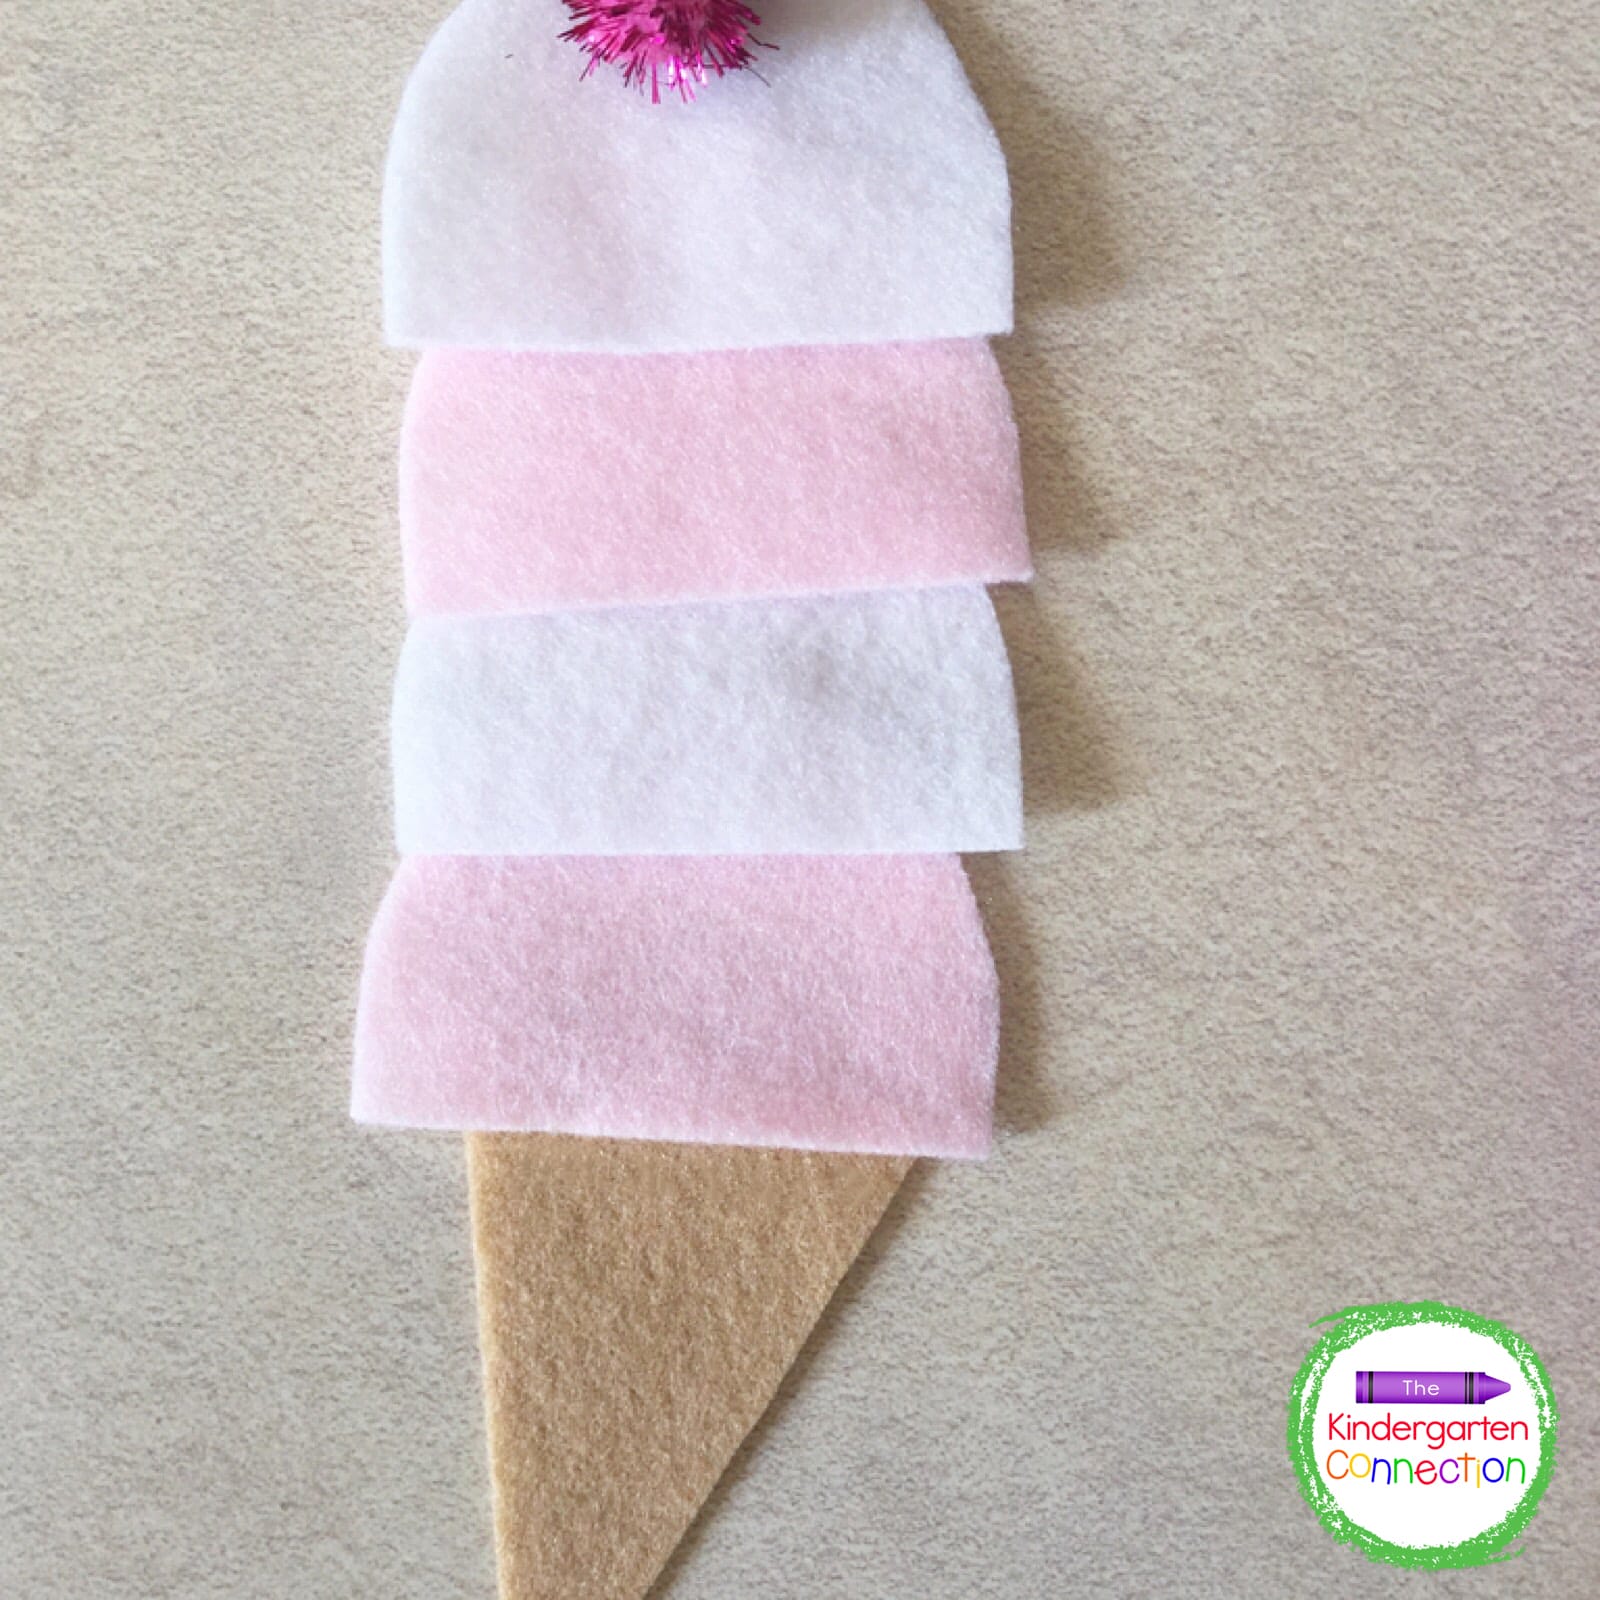 Kids can use the felt ice cream scoops to order by color and practice patterning skills.